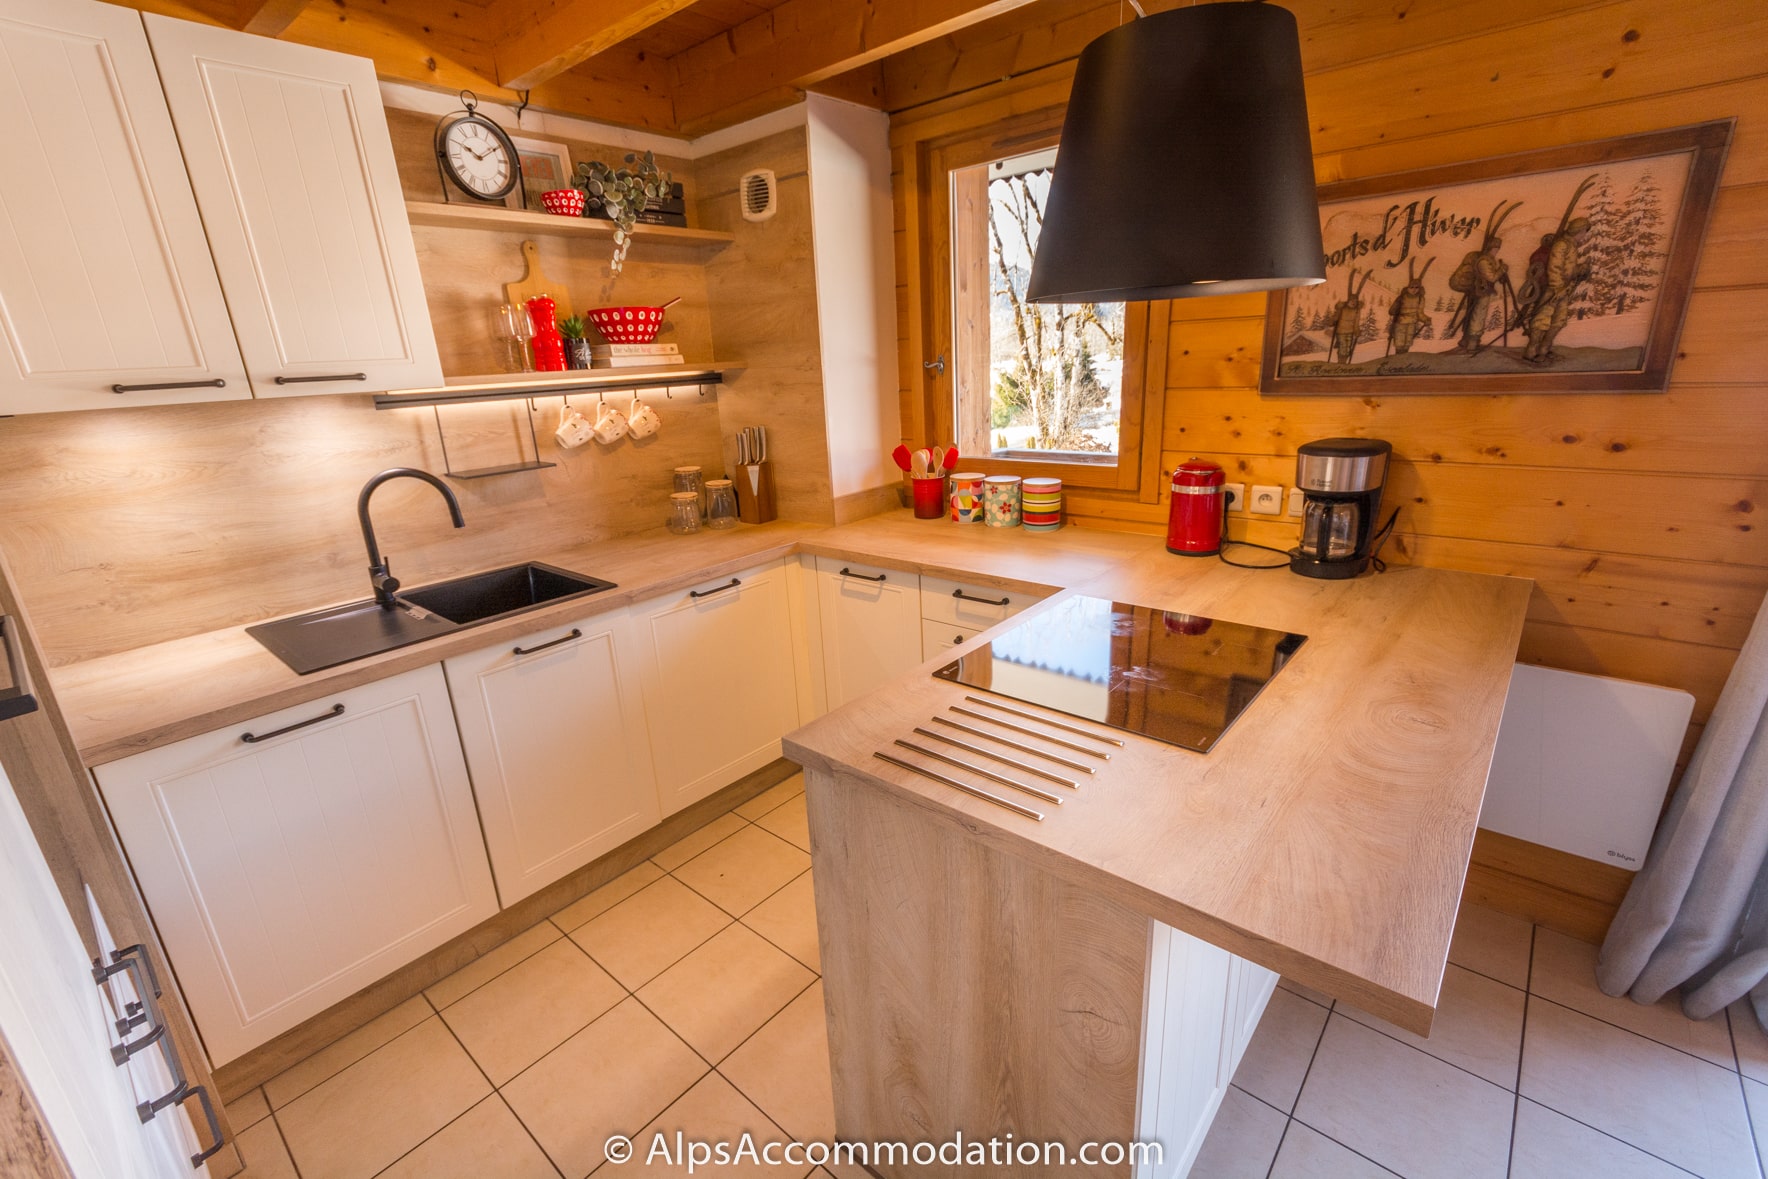 Pas Au Loup A10 Samoens - Excellent kitchen which comes very well equipped